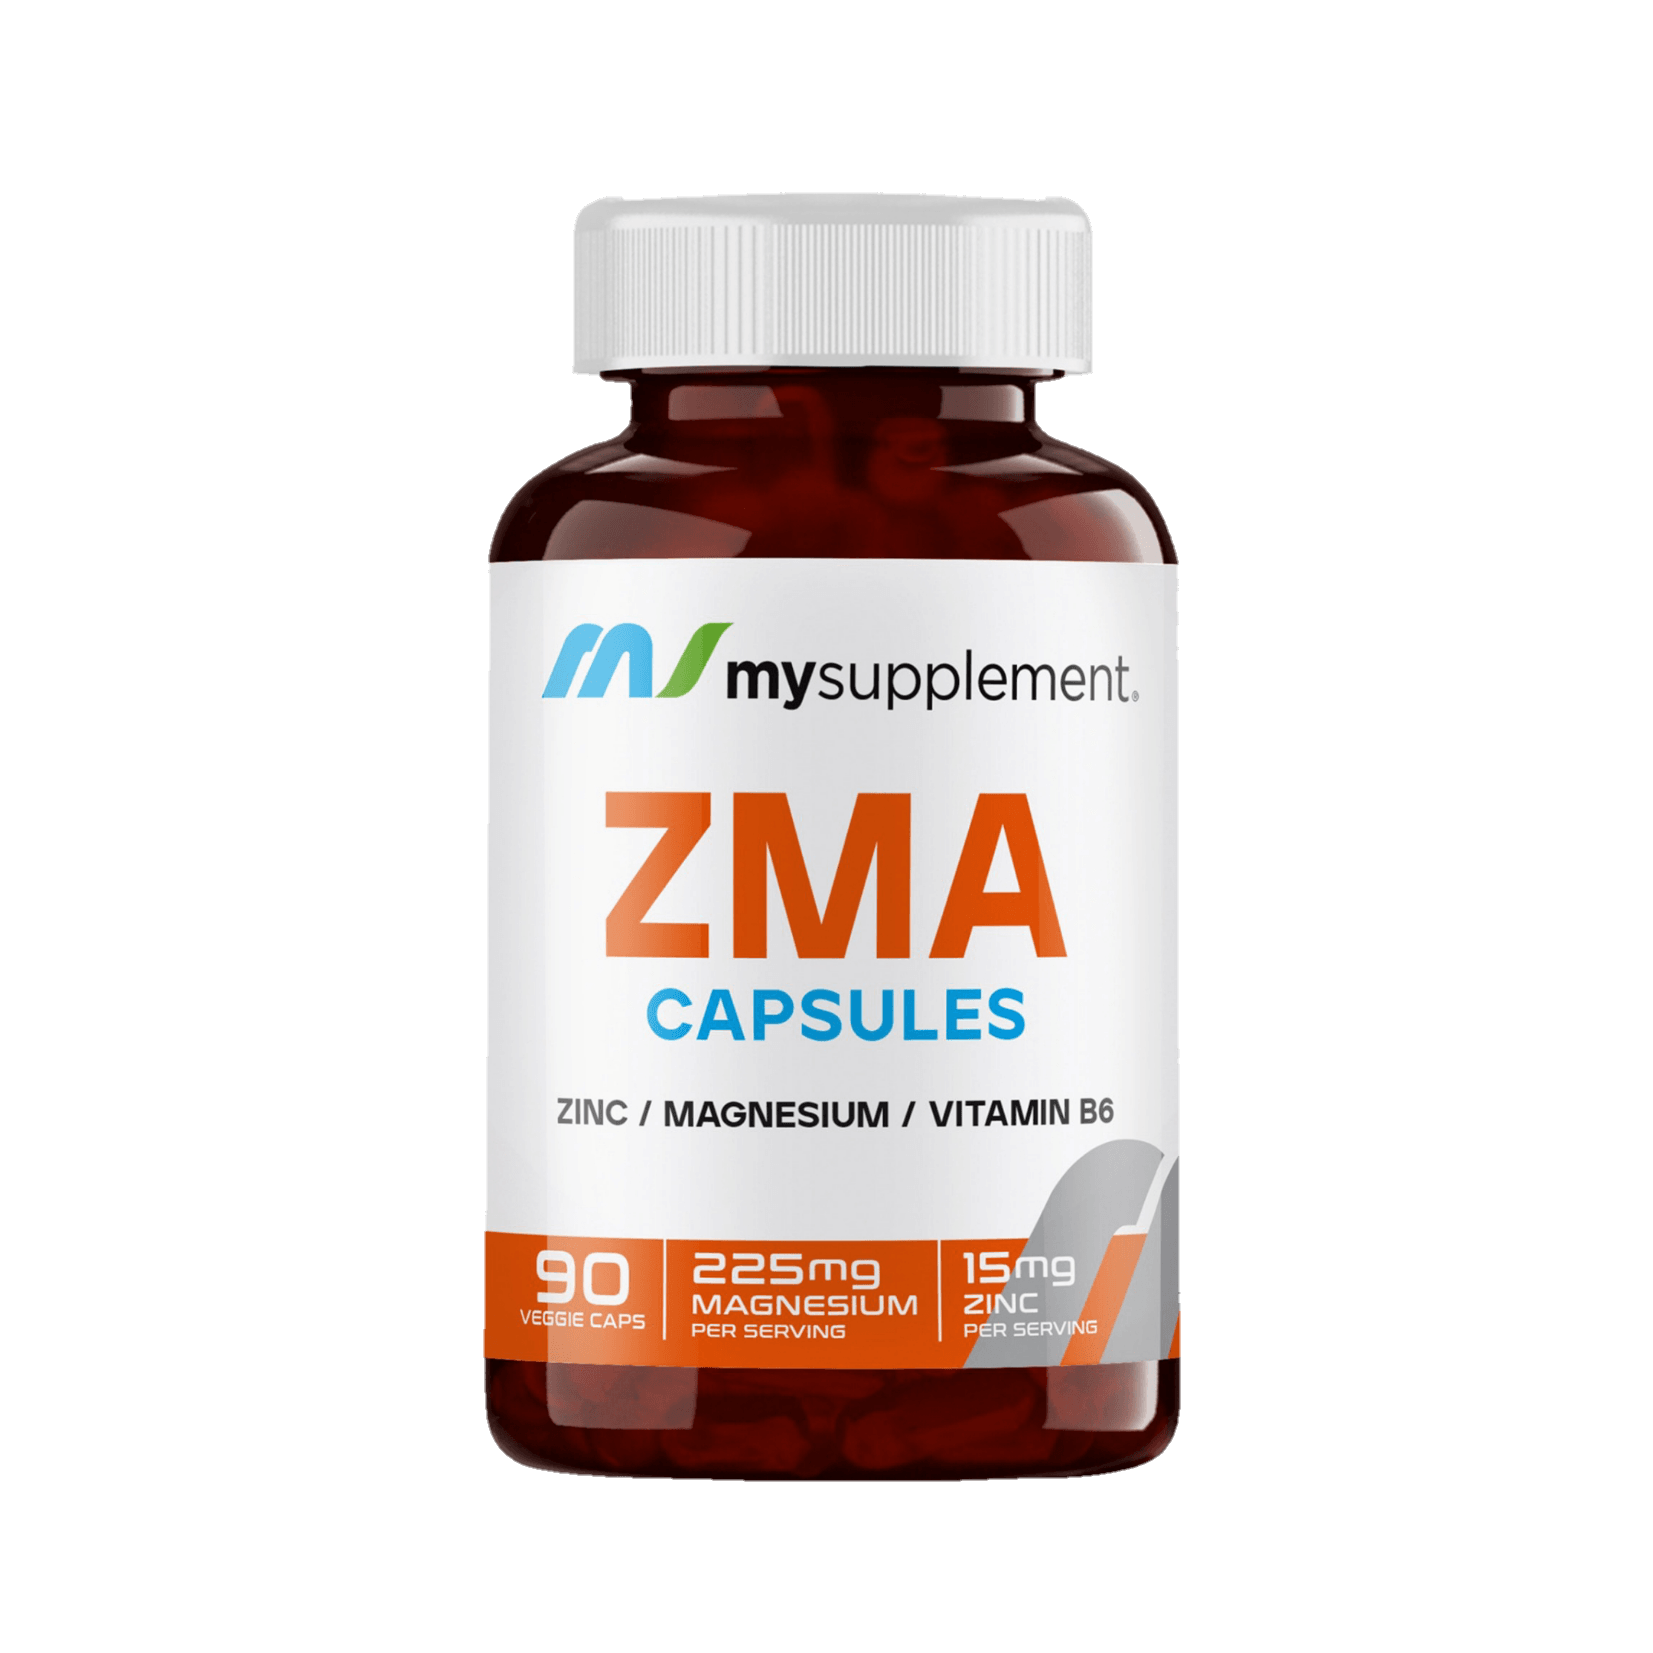 ZMA MY SUPPLEMENT - The Supplements Factory